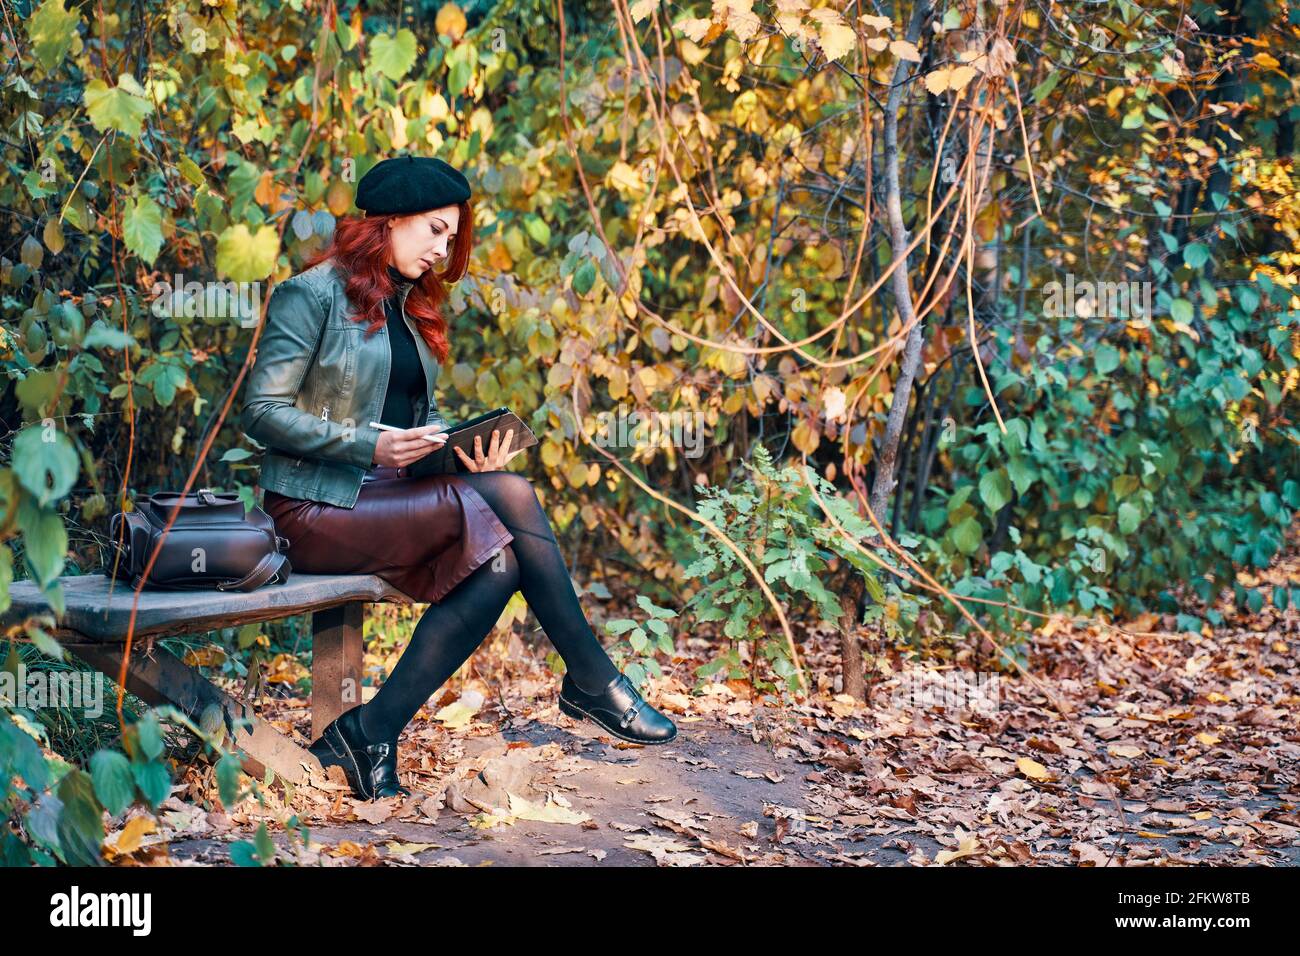 Woman with graphic tablet on park bench. Autumn landscape in the background. Red-haired girl in a beret and a fashionable jacket with a leather backpack. Designer or freelancer in nature. Stock Photo